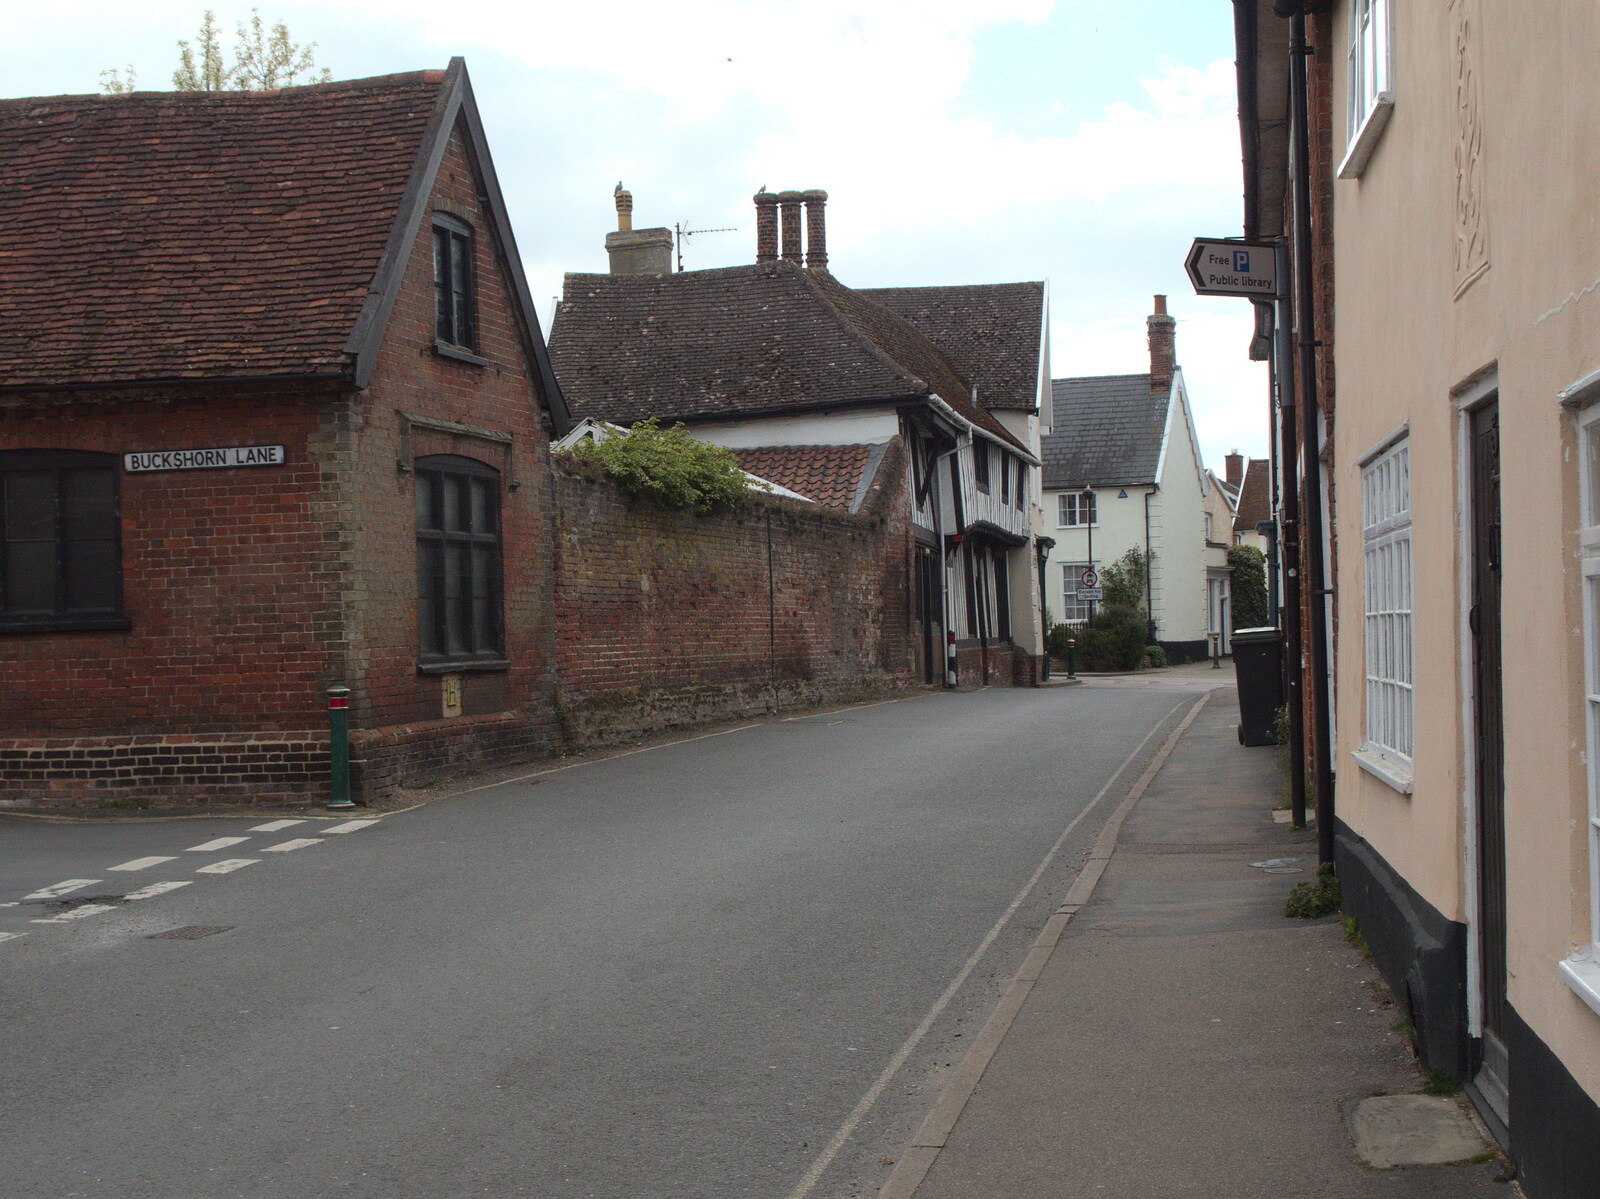 Church Street and Buckshorn Lane from BSCC Beer Garden Hypothermia, Hoxne and Brome, Suffolk - 22nd April 2021